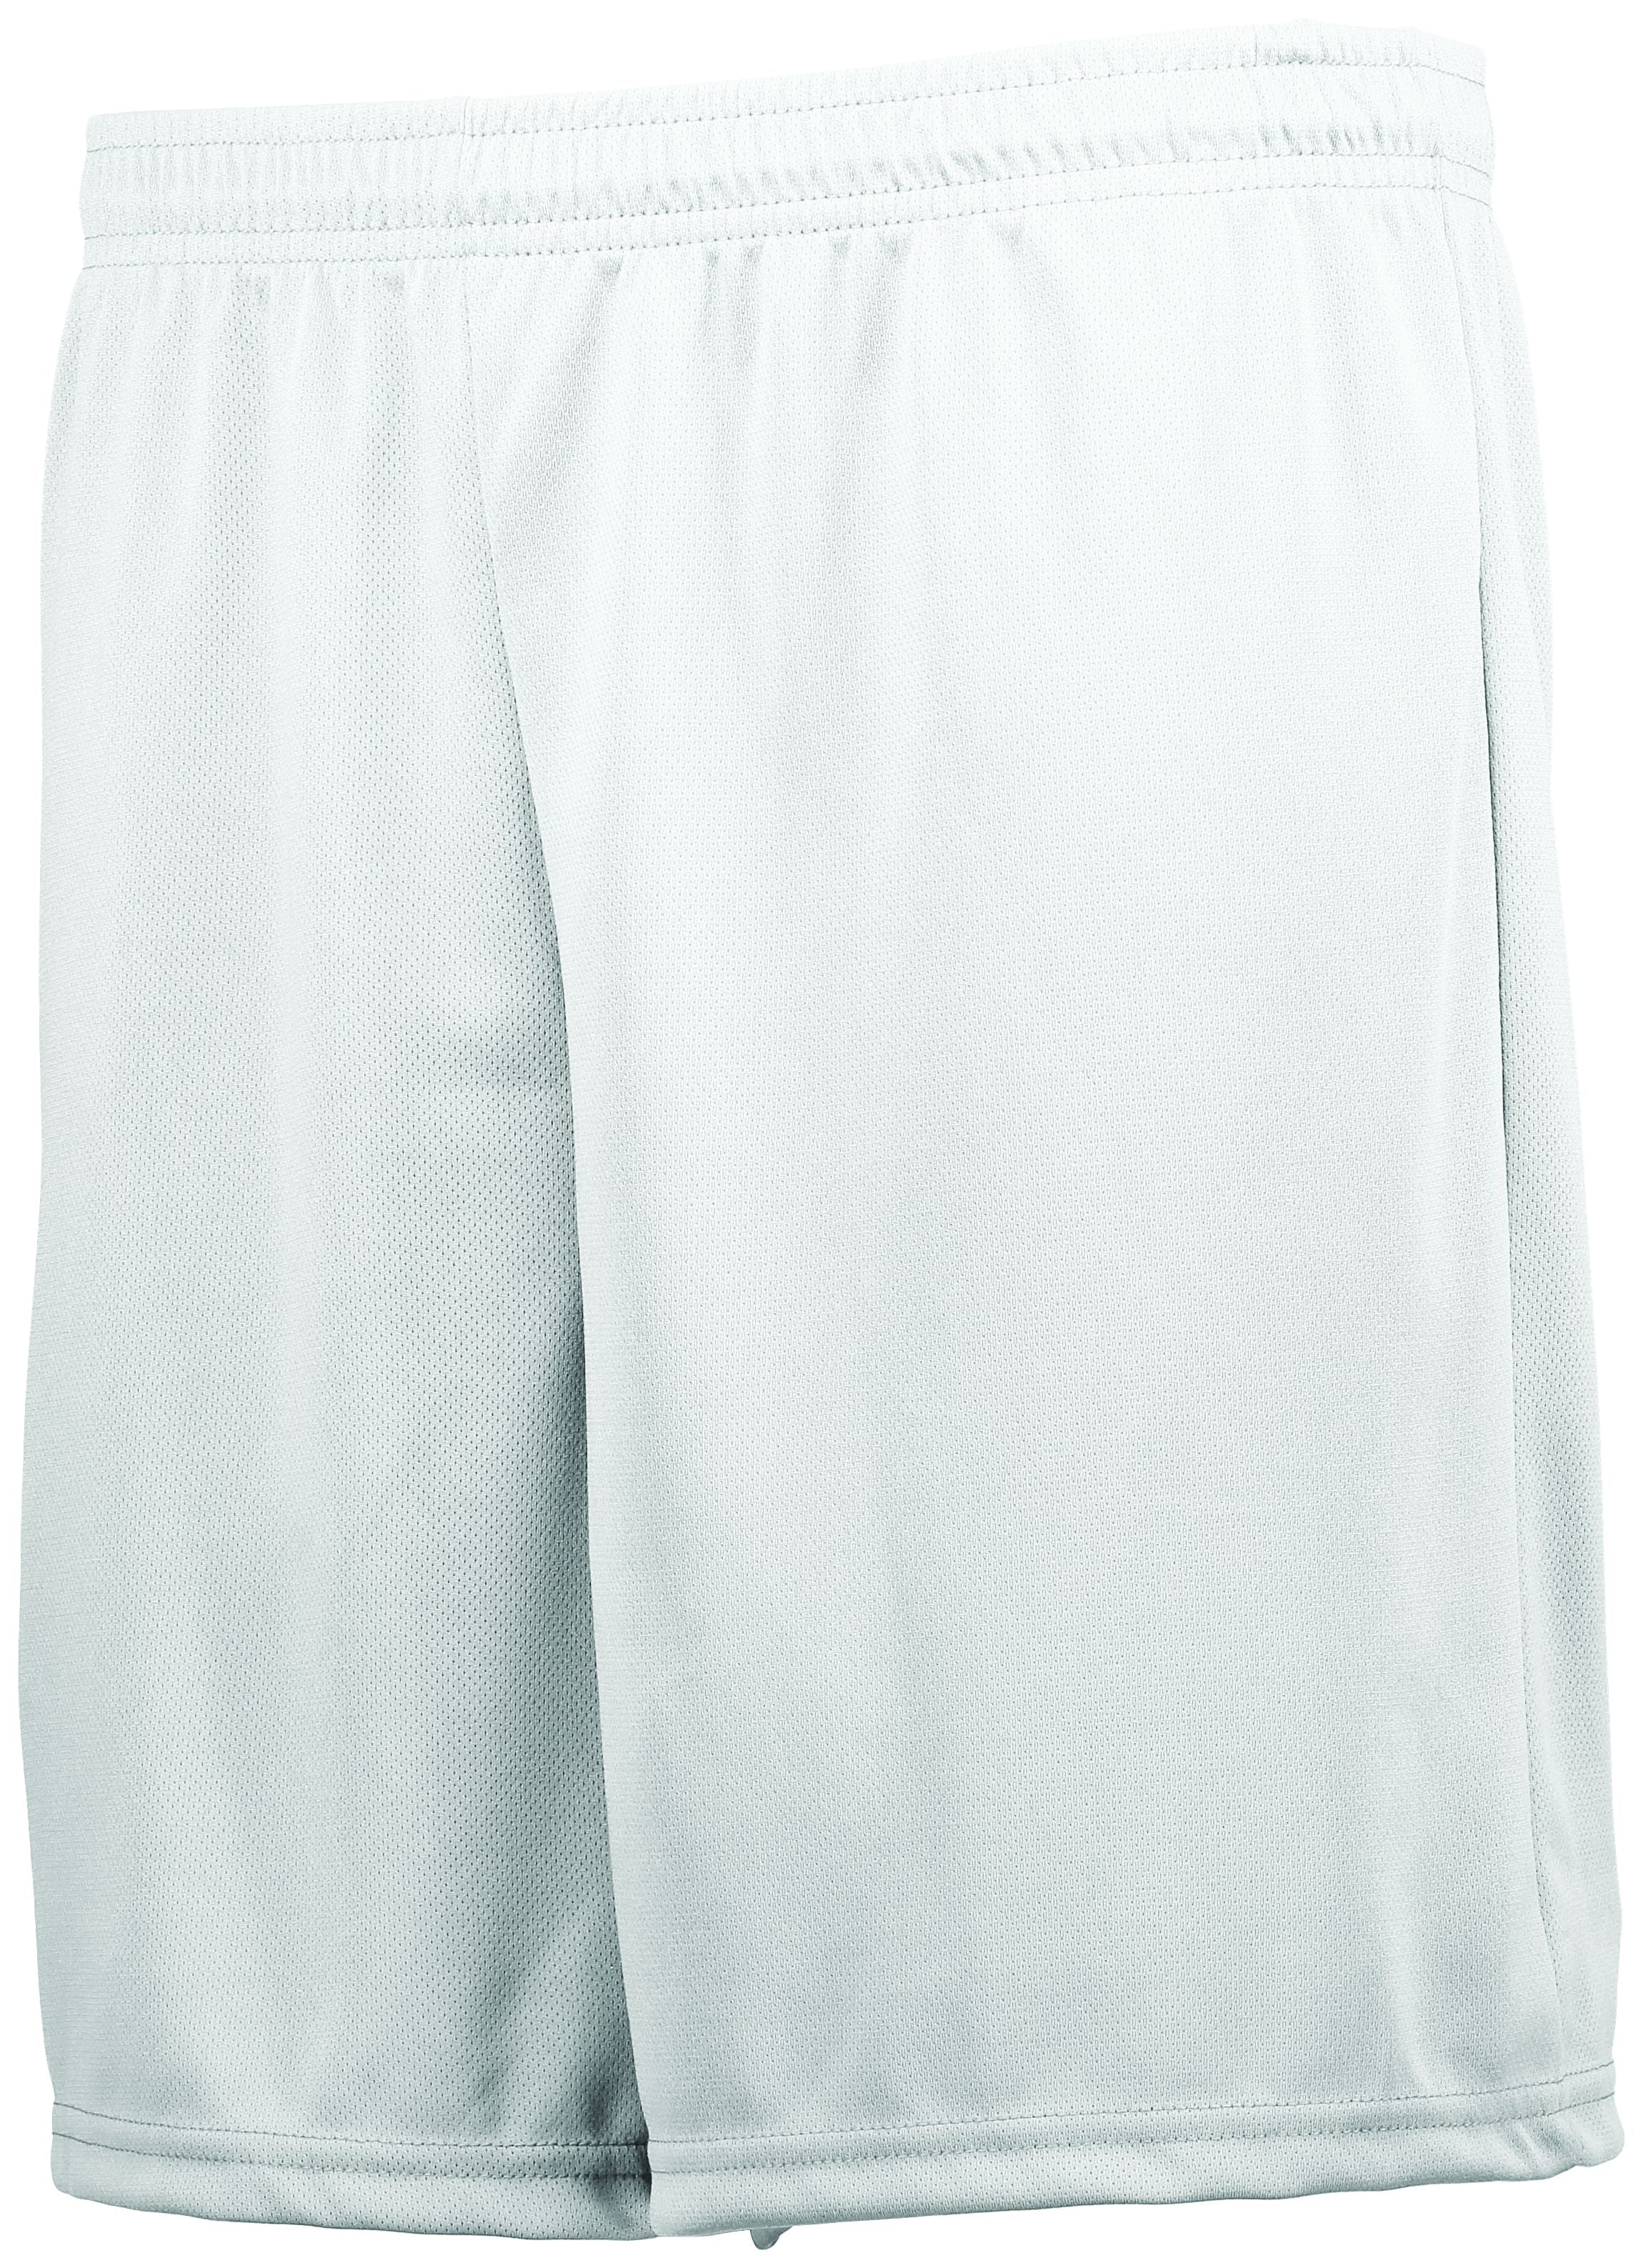 High 5 Youth Prevail Shorts in White  -Part of the Youth, Youth-Shorts, High5-Products, Soccer, All-Sports-1 product lines at KanaleyCreations.com